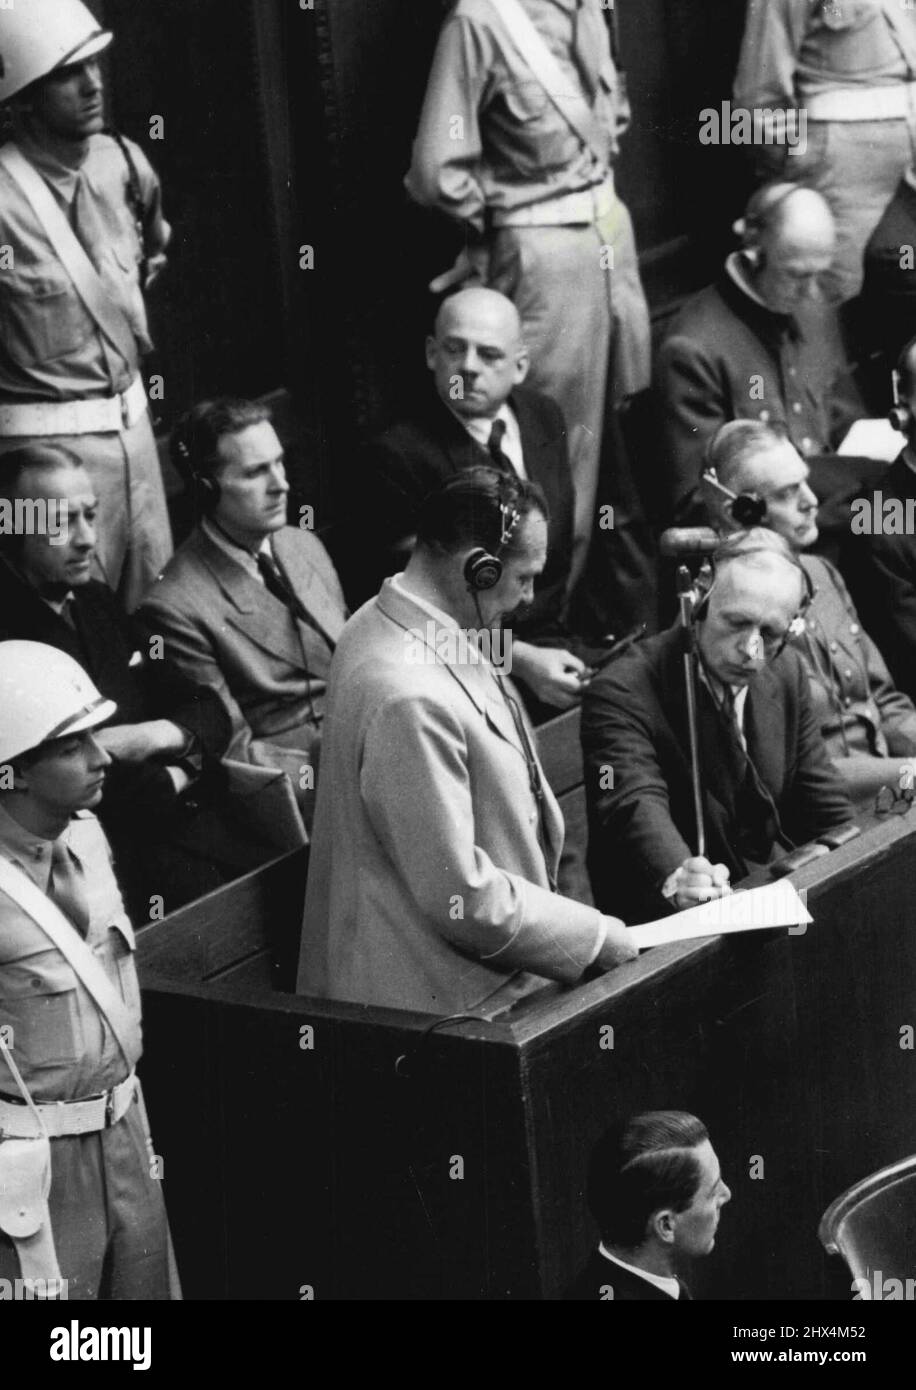 Herman Goering is seen making his ***** at the Nuremberg court today August 31. Herman Goering one-time ***** marshal and Luftwaffe chief. Led the 20 ***** accused of war crimes as the Nuremberg trial, today, August 31, when the Nazi ***** made their final pleas, before the court adjourned to consider the *****. September 10, 1941. (Photo by Associated Press Photo). Stock Photo